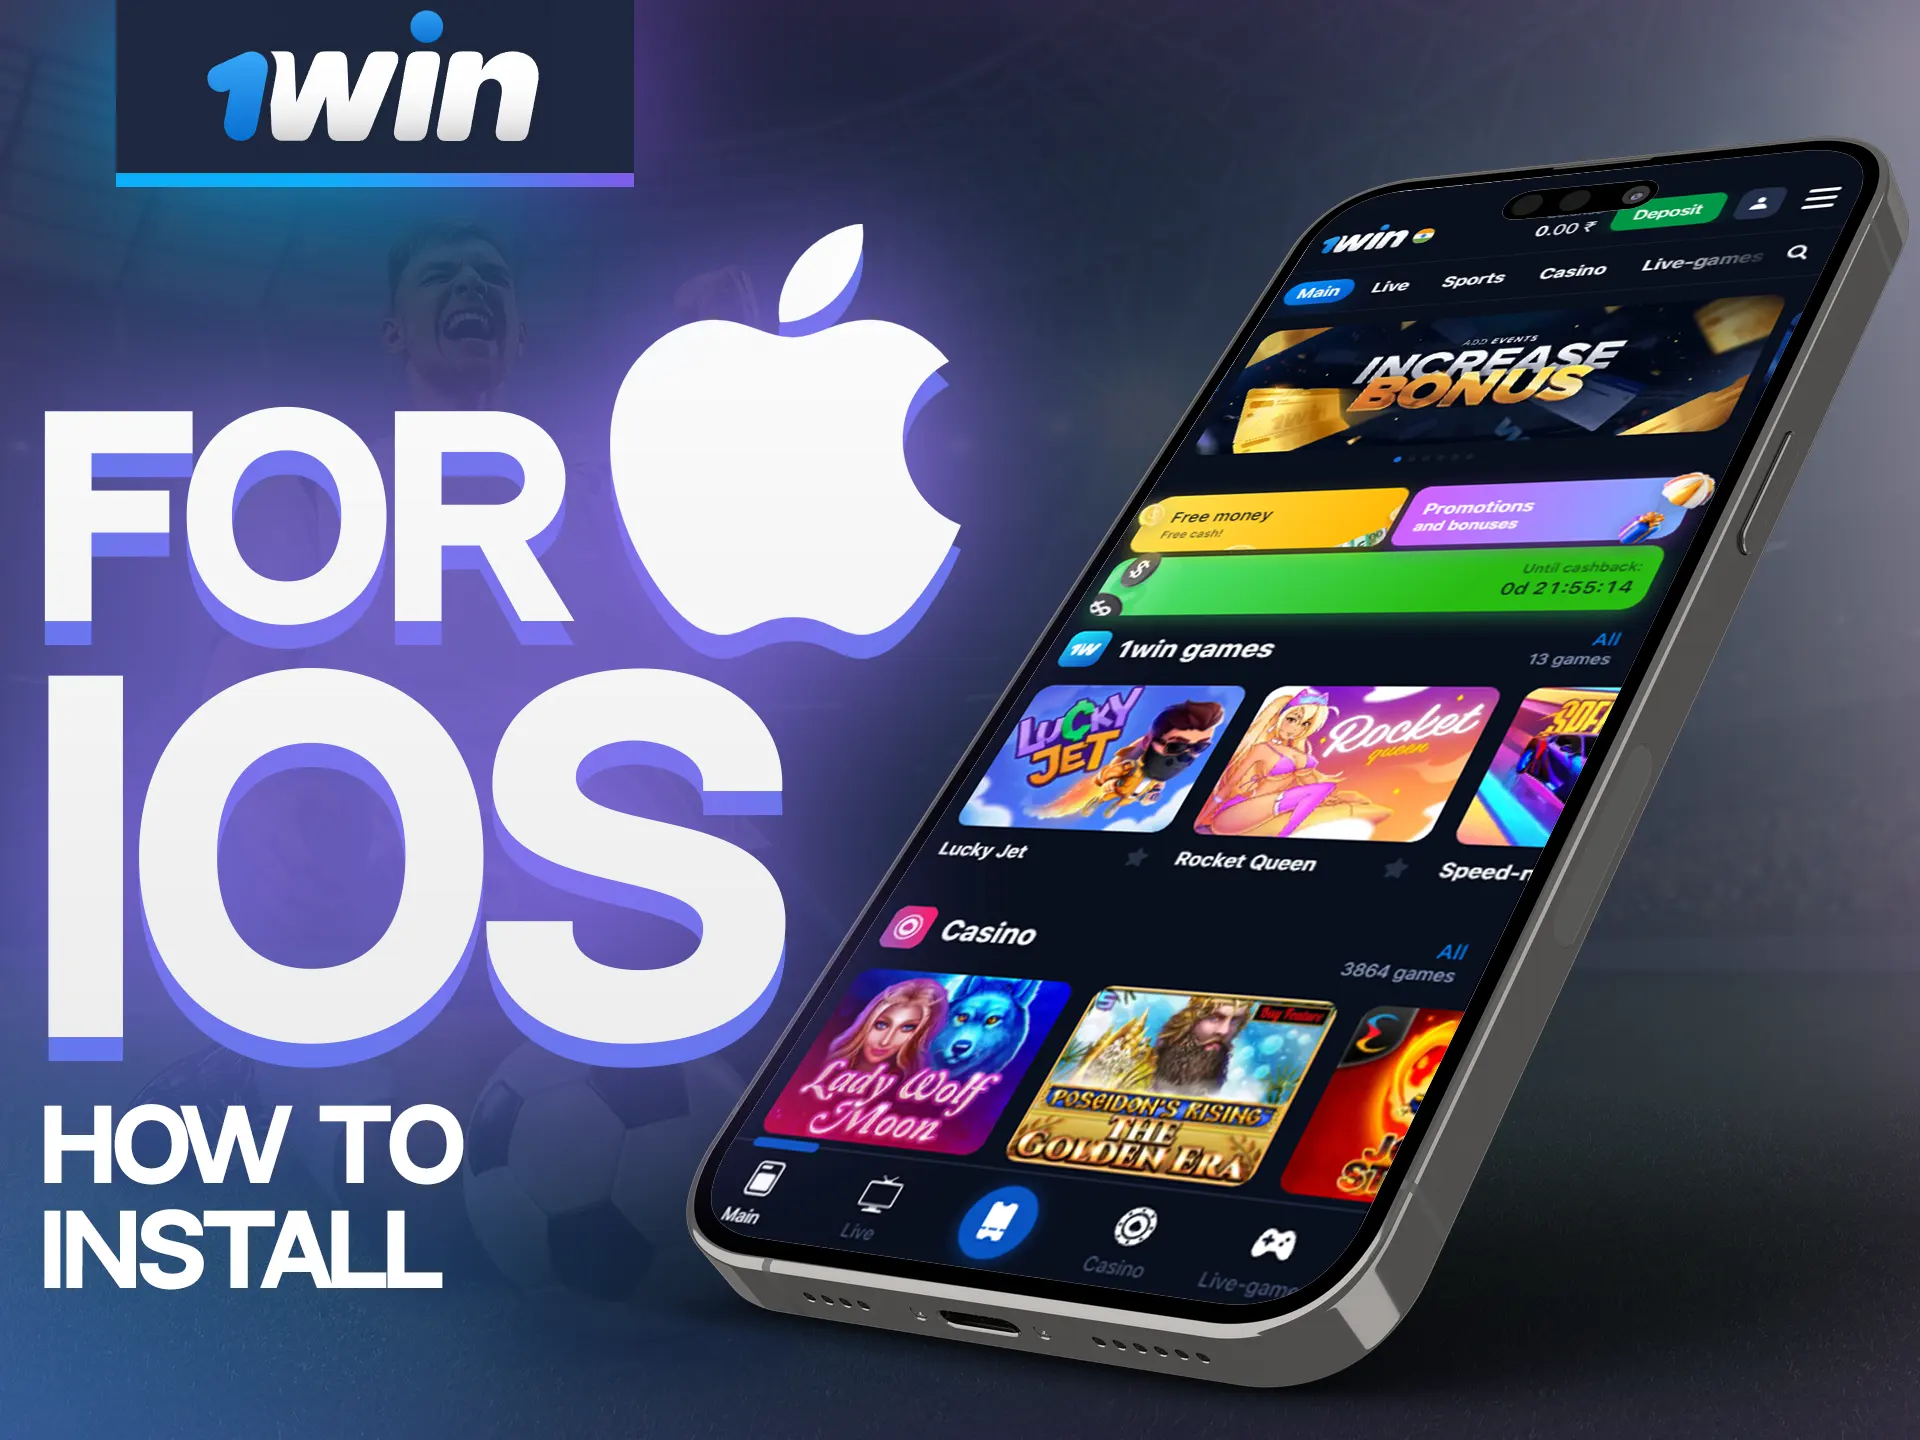 With these instructions, install the 1Win app on your iOS phone easily.